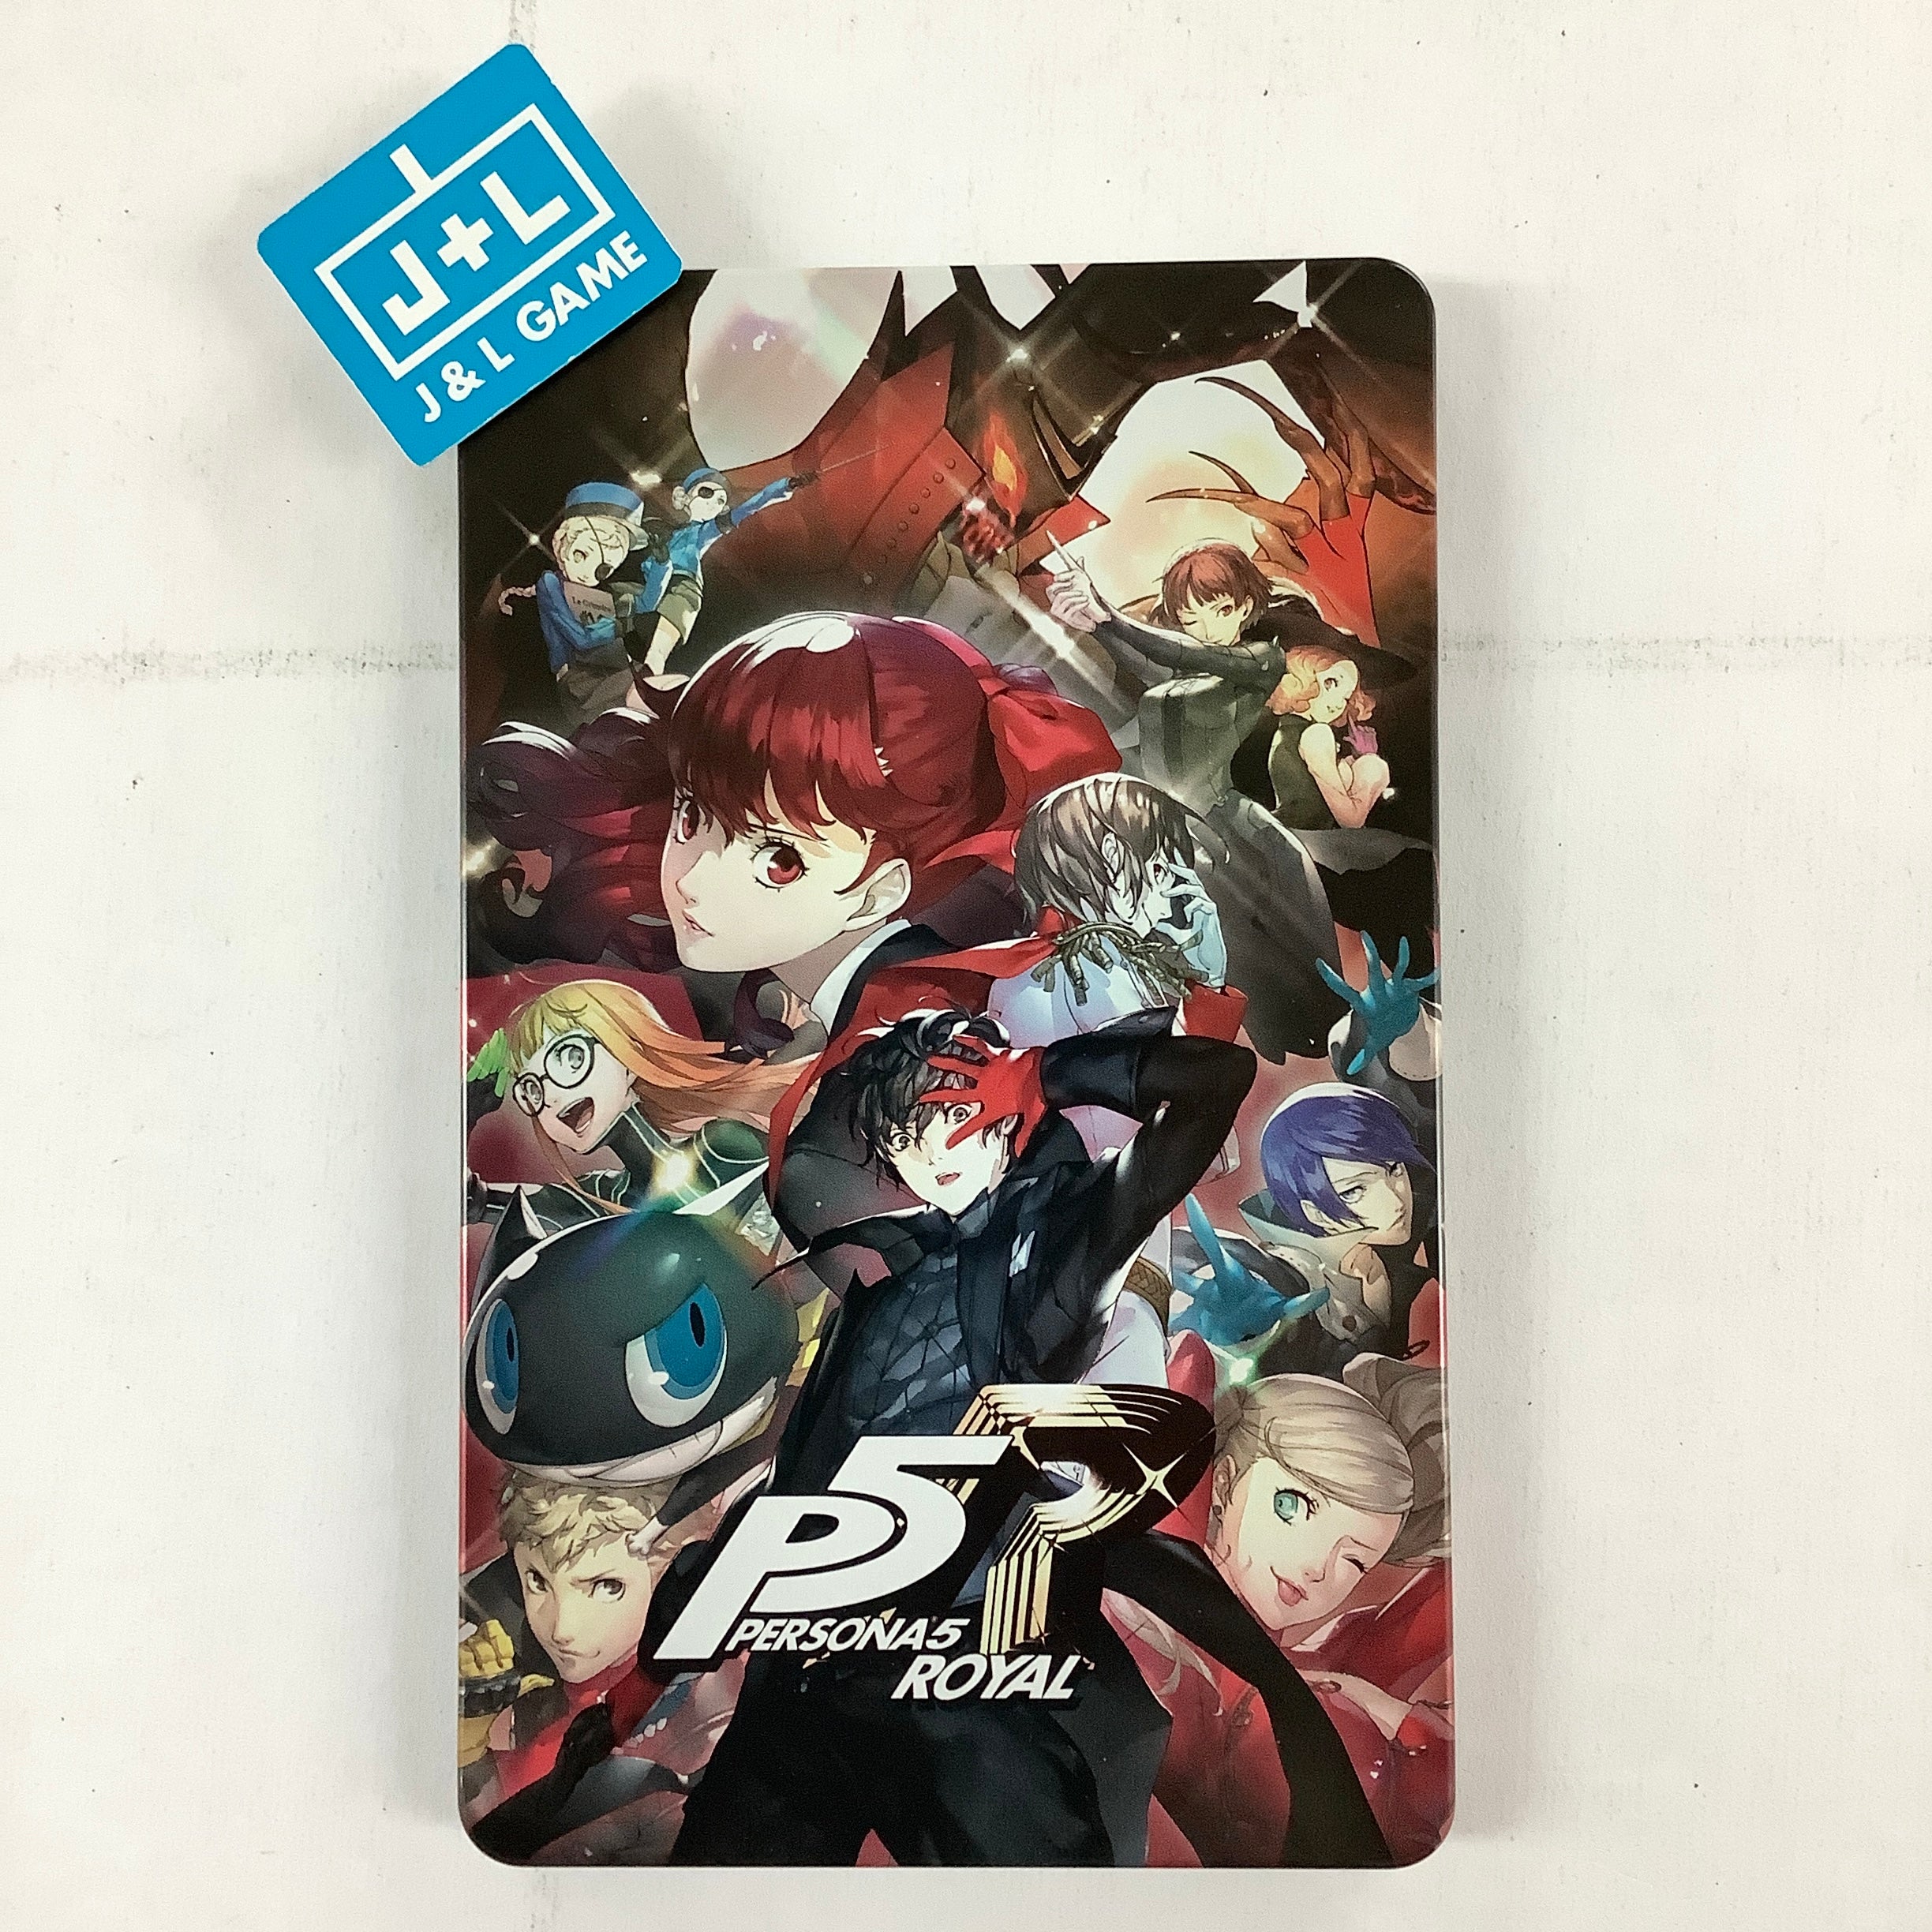 Persona 5 Royal: Steelbook Launch Edition - (NSW) Nintendo Switch [UNBOXING] Video Games SEGA   